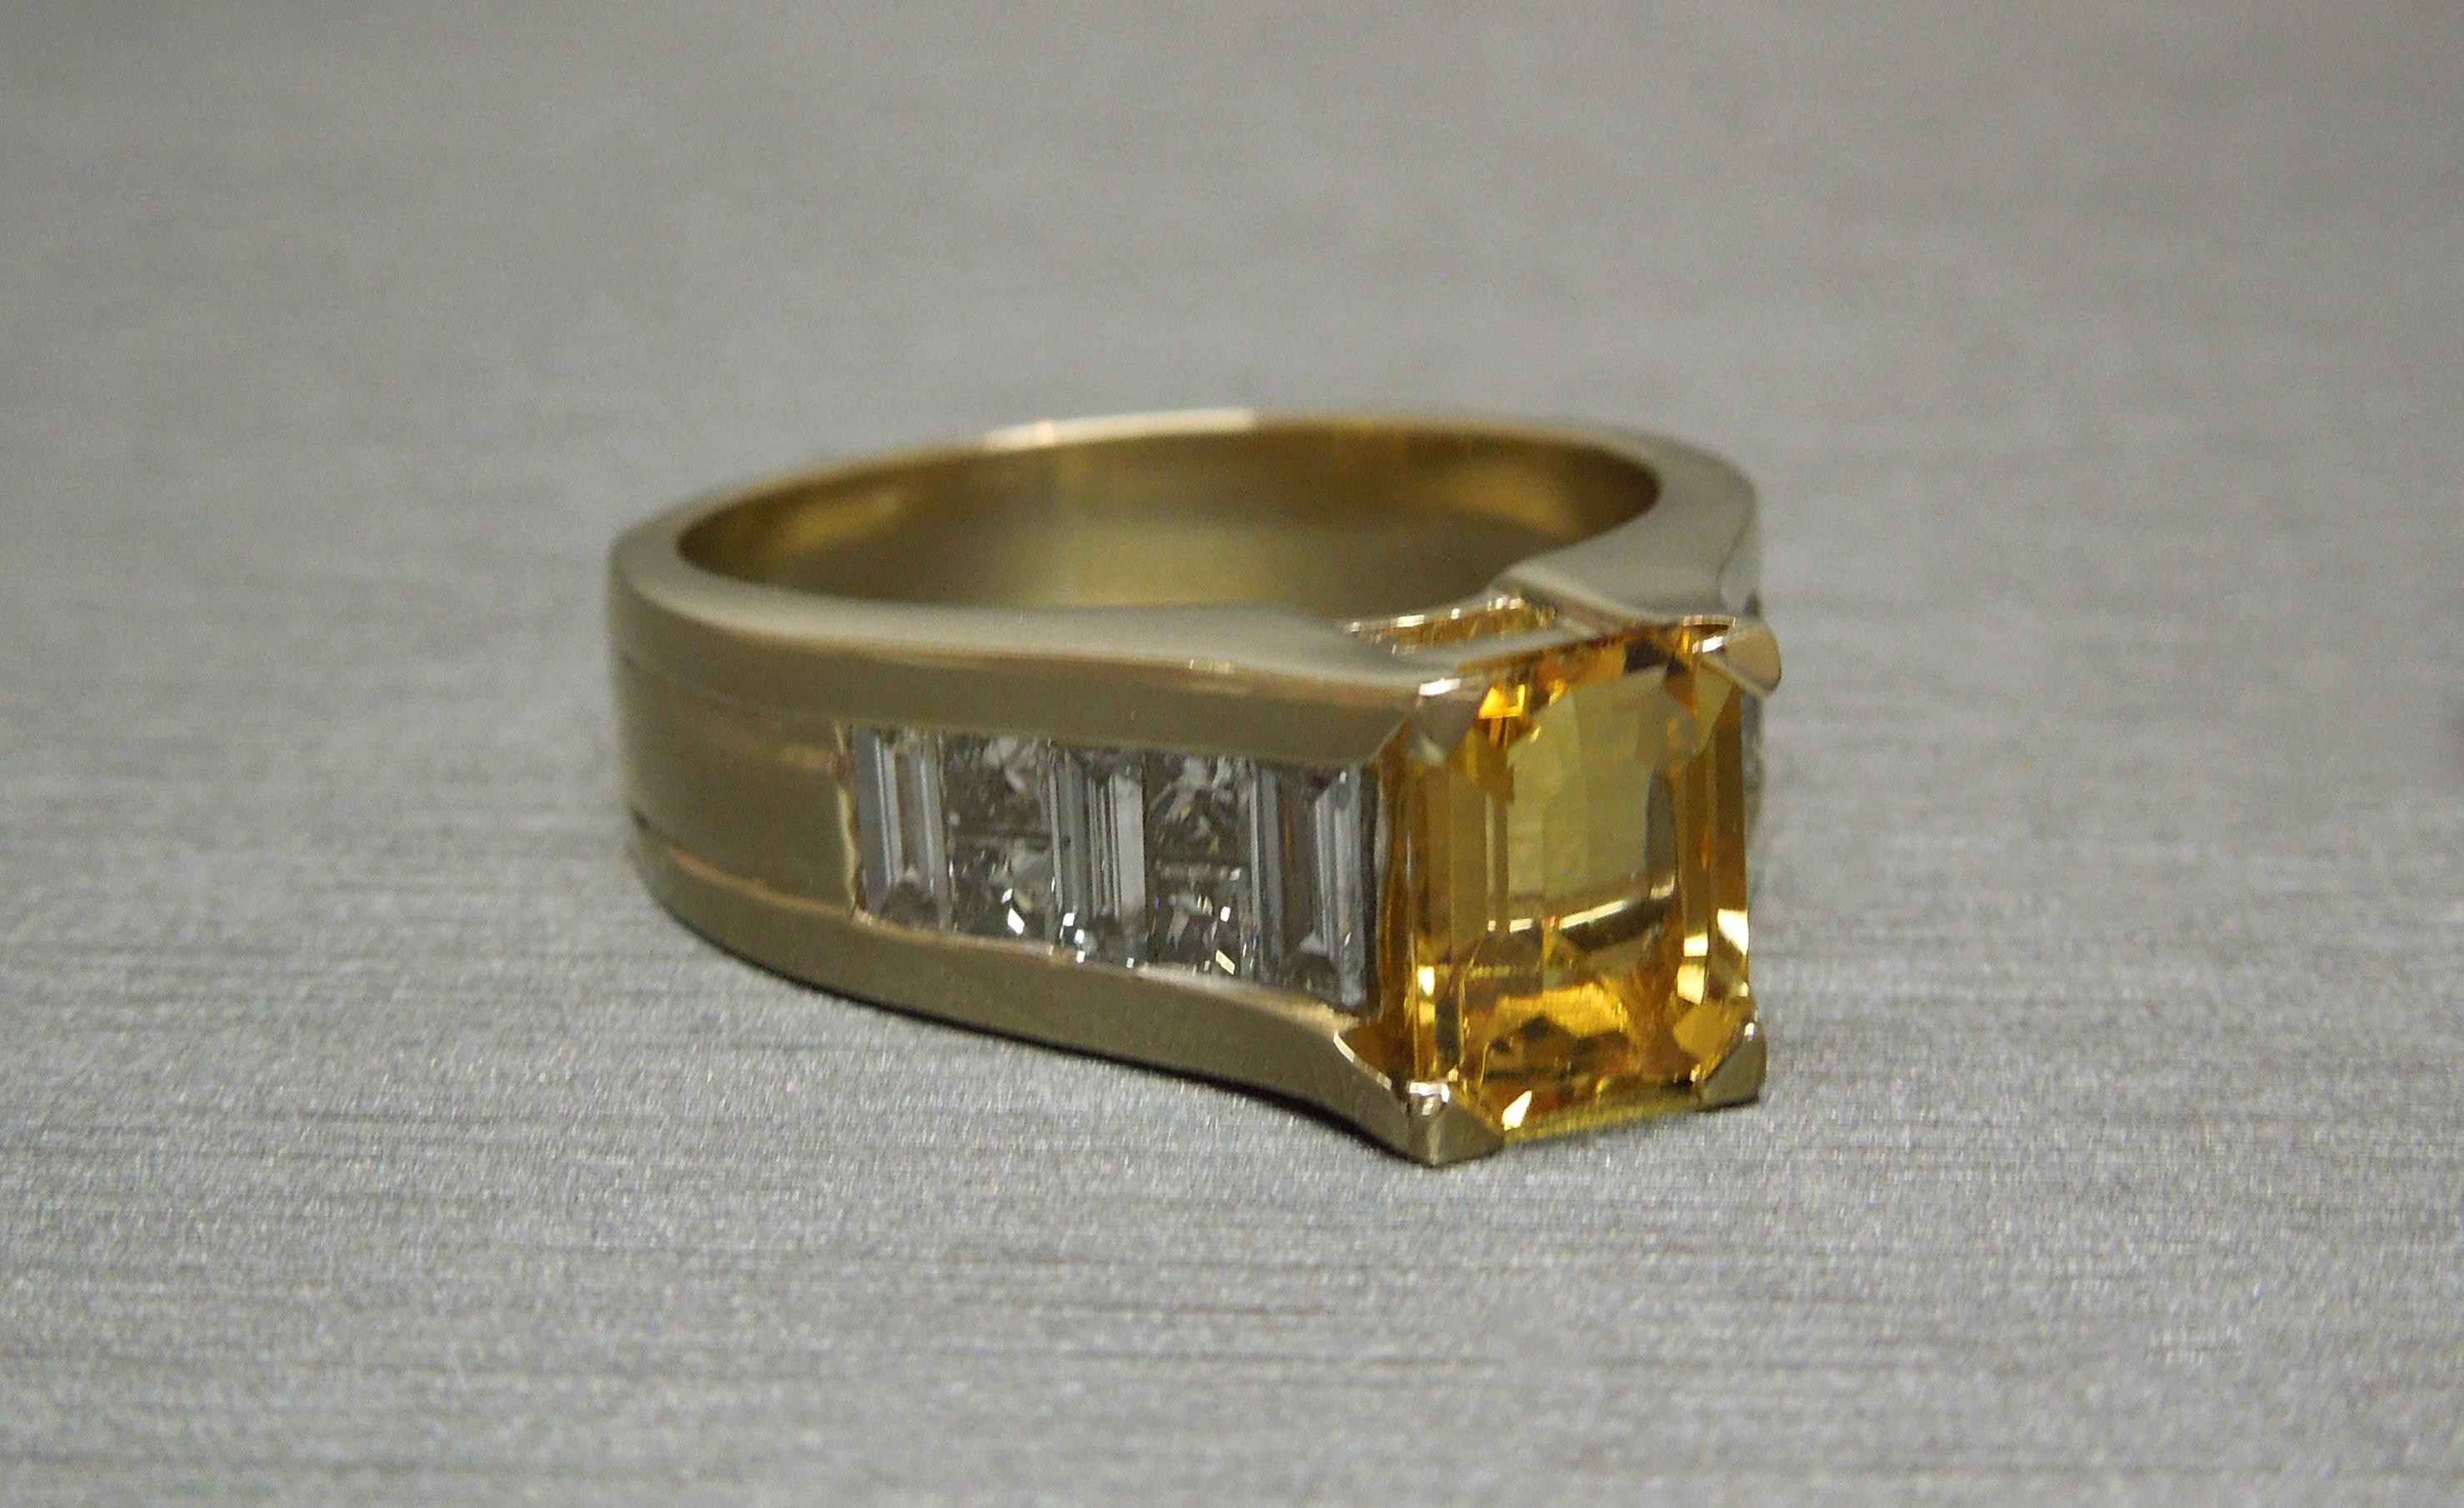 Constructed completely of 14KT Yellow Gold in an Art Deco inspired pyramid design featuring a central 1.38 carat Emerald cut coveted Natural Golden Beryl at 7mm x 5.4mm securely set in four prongs. Side sections flanked with a total of 6 Channeled